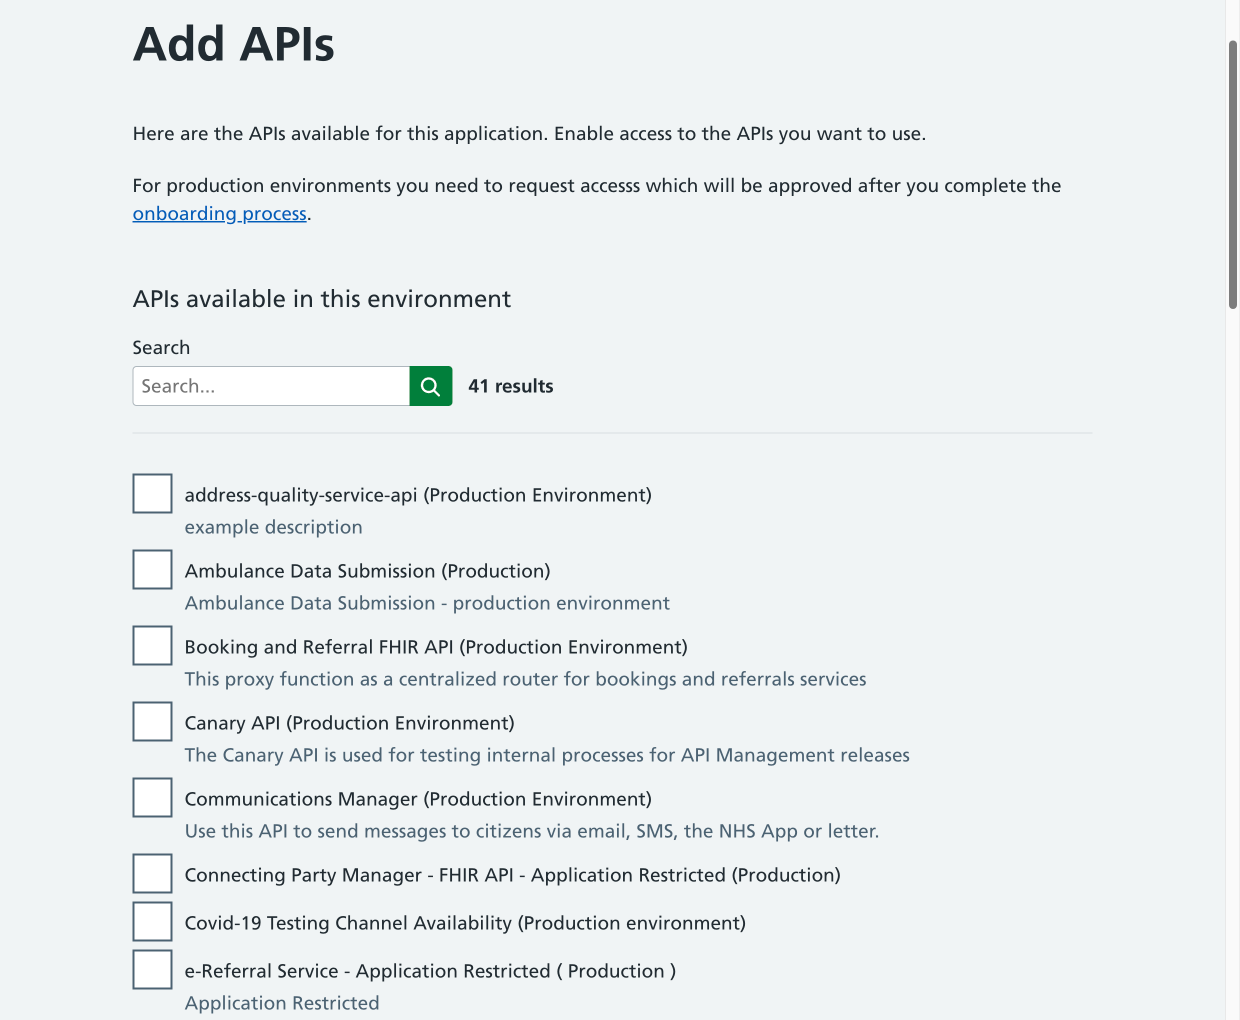 A screenshot of the 'Add APIs' page. There is a list of APIs that can be selected